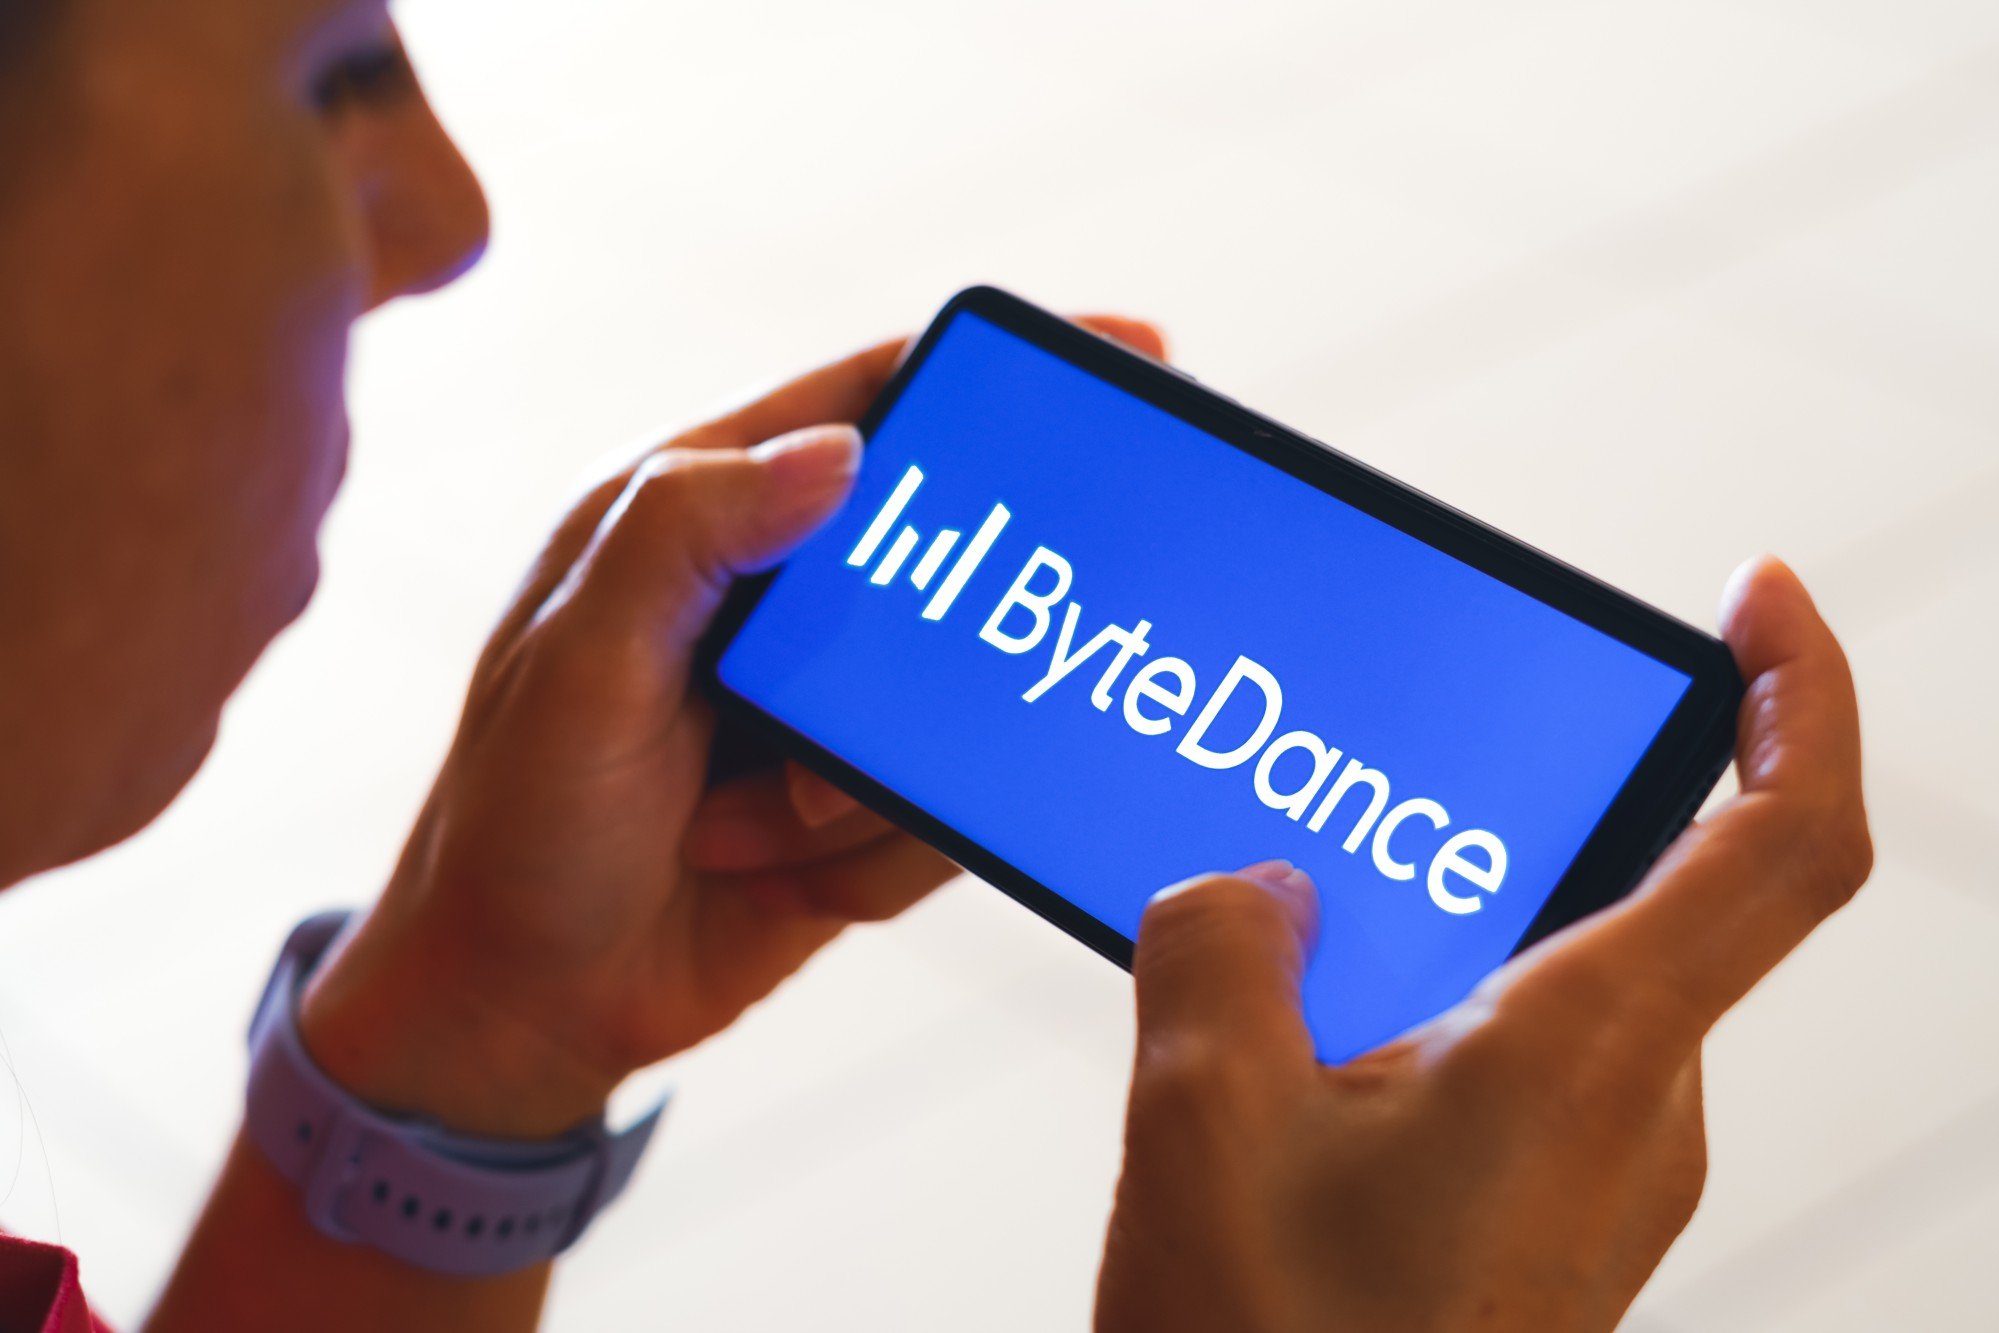 TikTok owner ByteDance accelerates generative AI efforts with increased talent acquisition, release of new tools